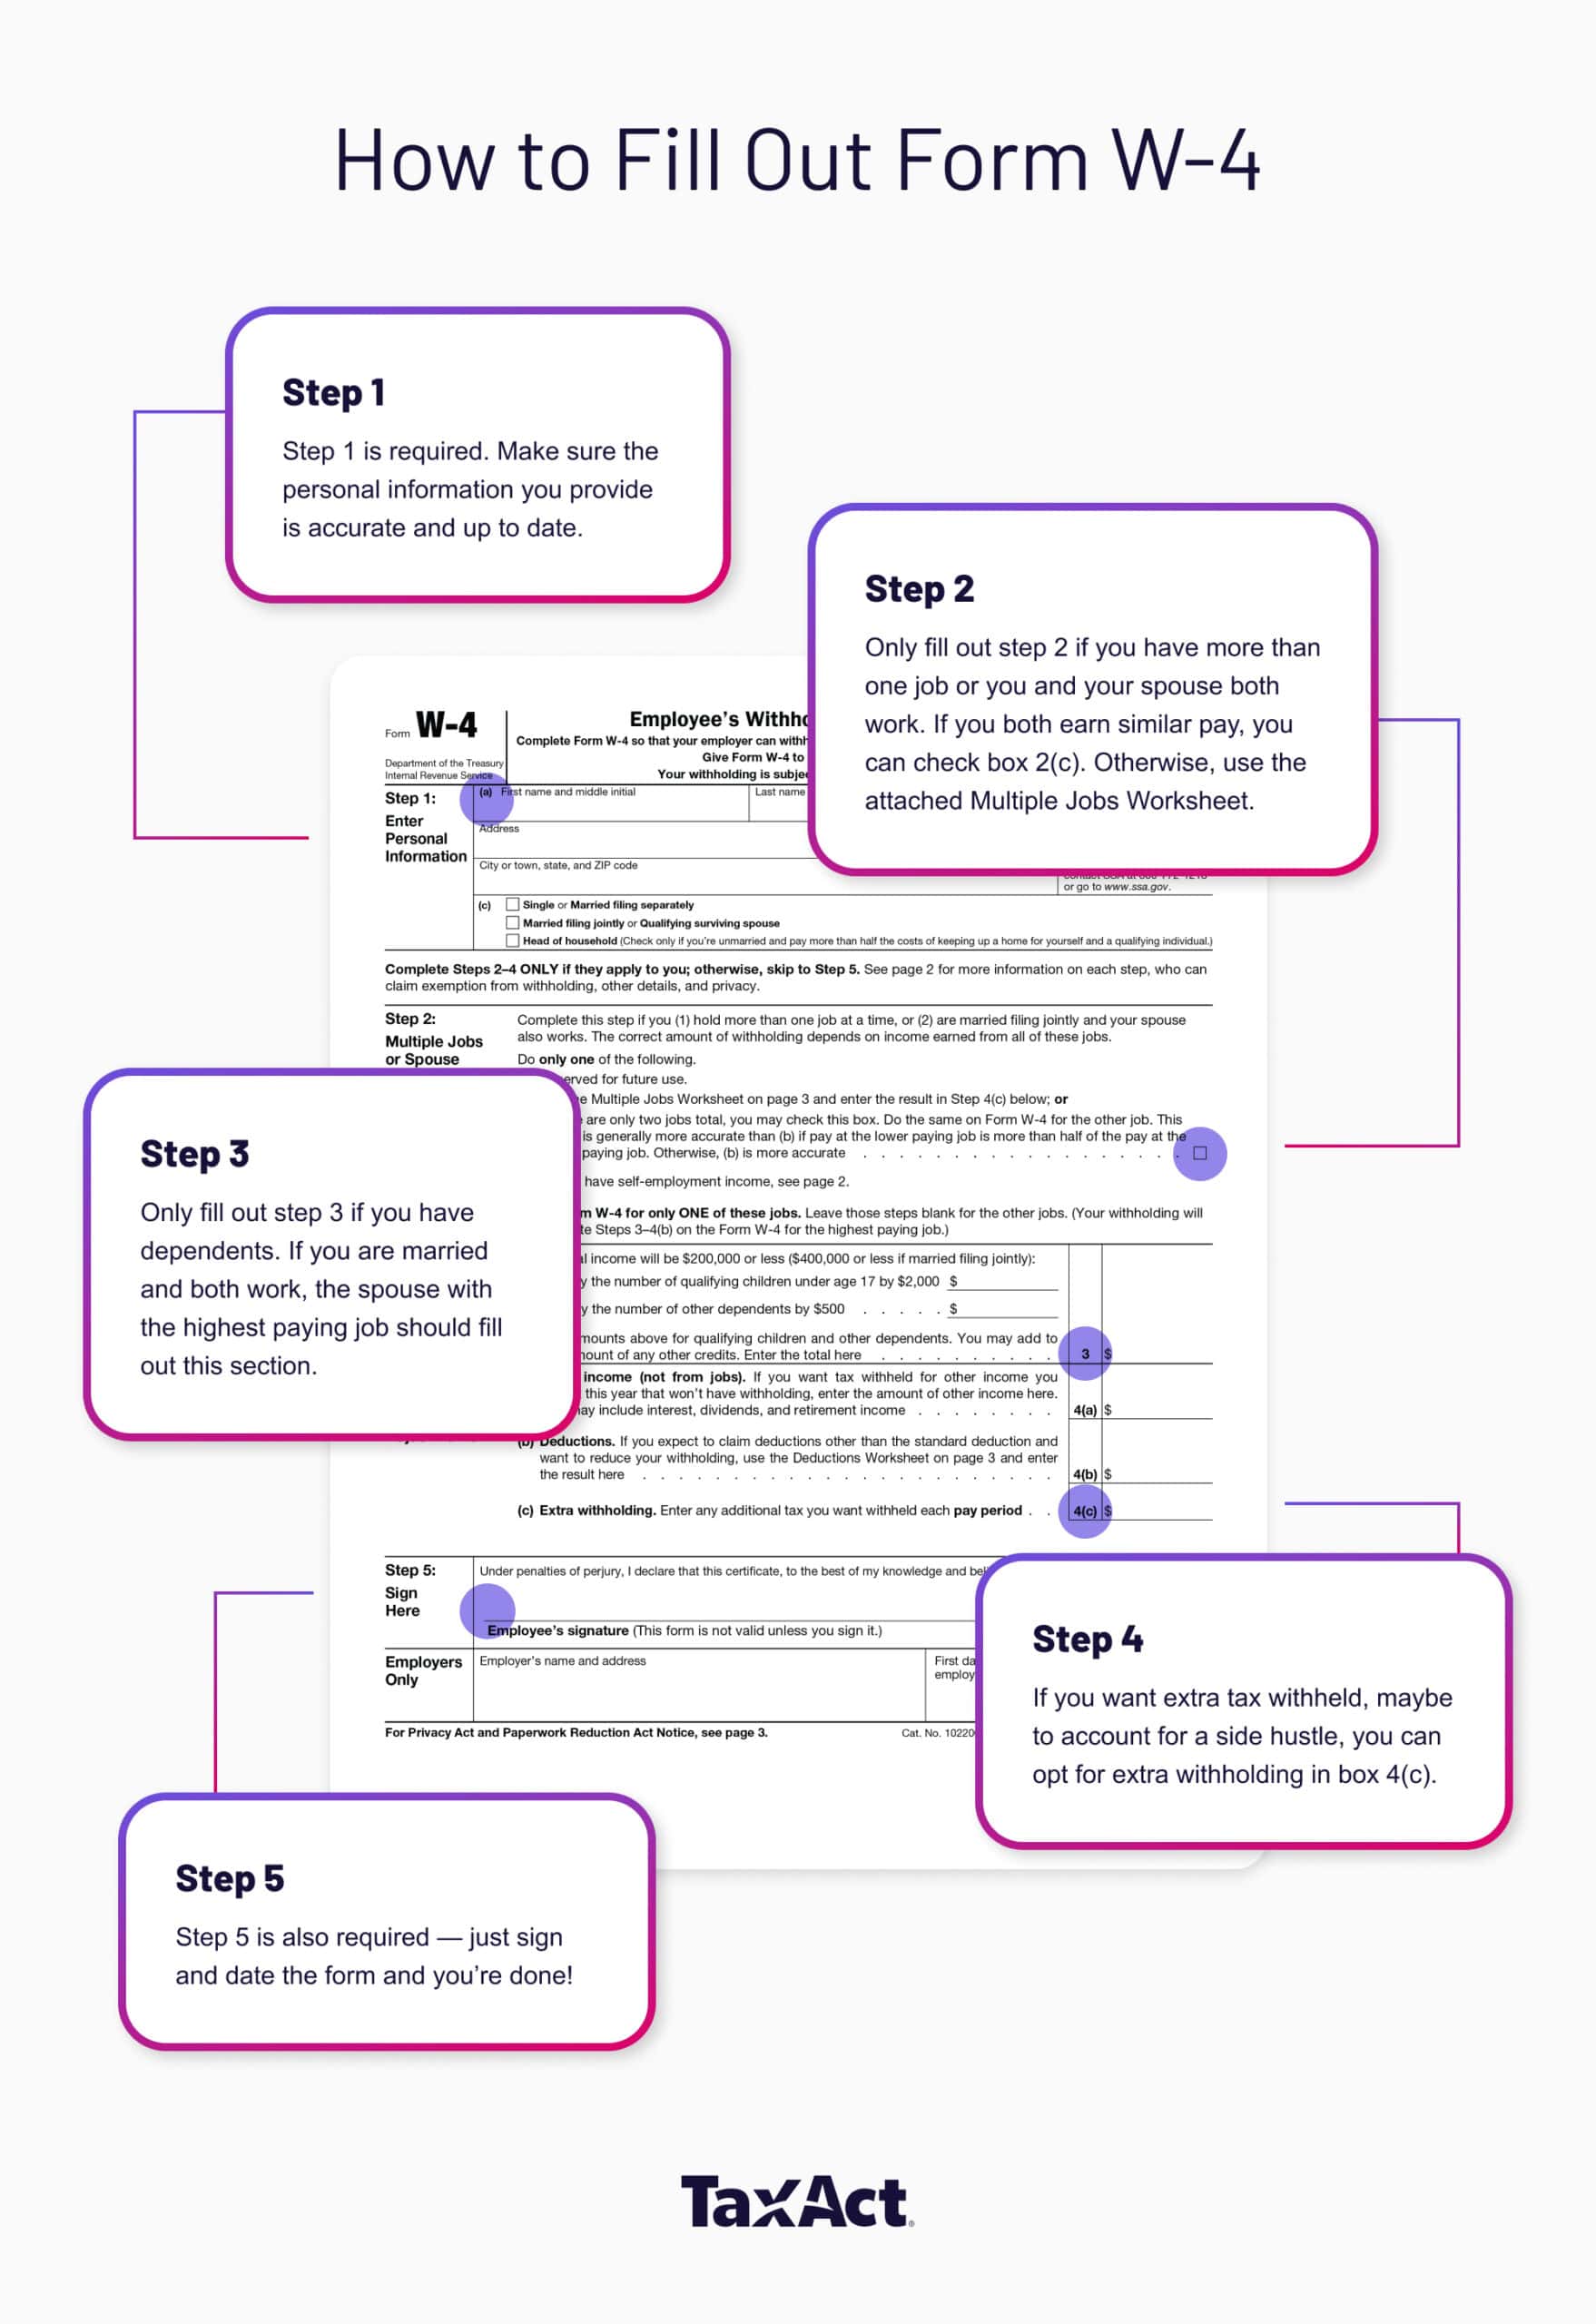 A infographic highlighting the different steps on Form W-4 and providing tips for each section